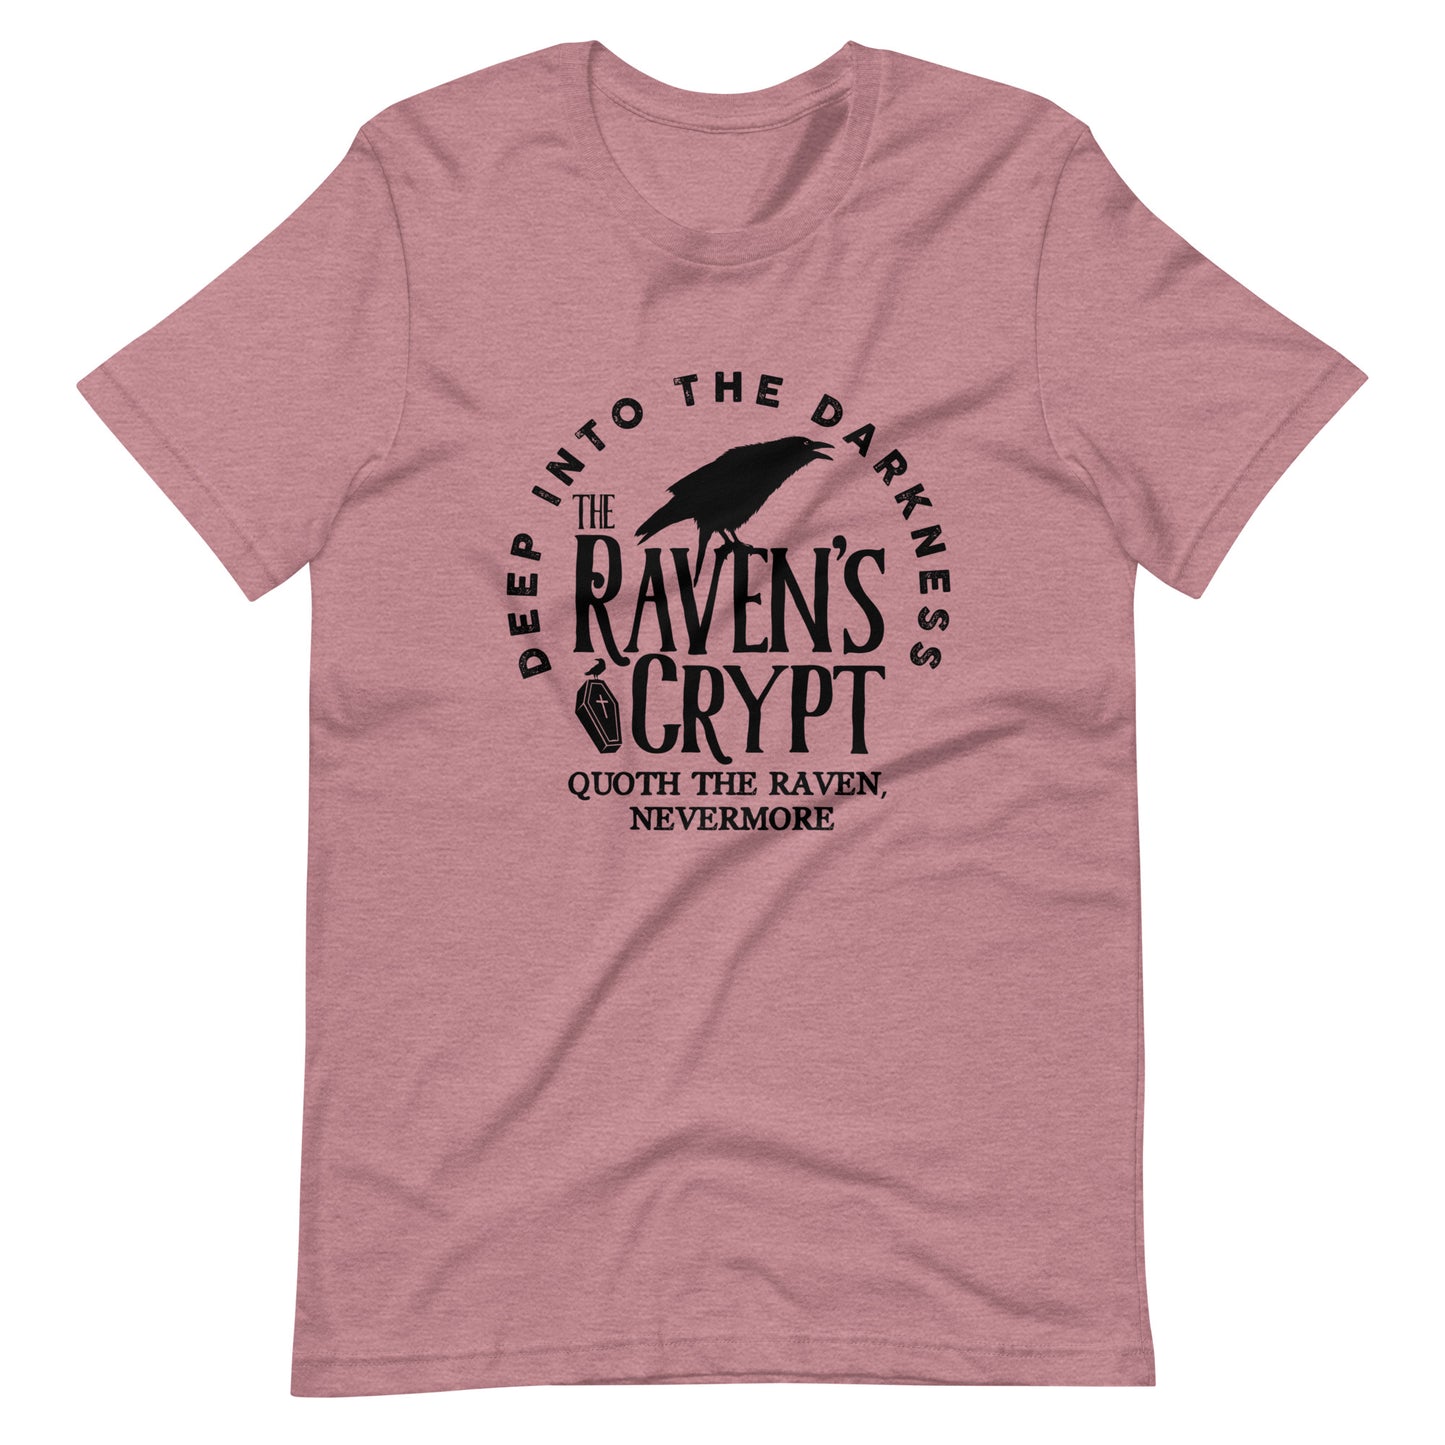 Deep Into the Darkness The Raven's Crypt - Men's t-shirt - Heather Orchid Front